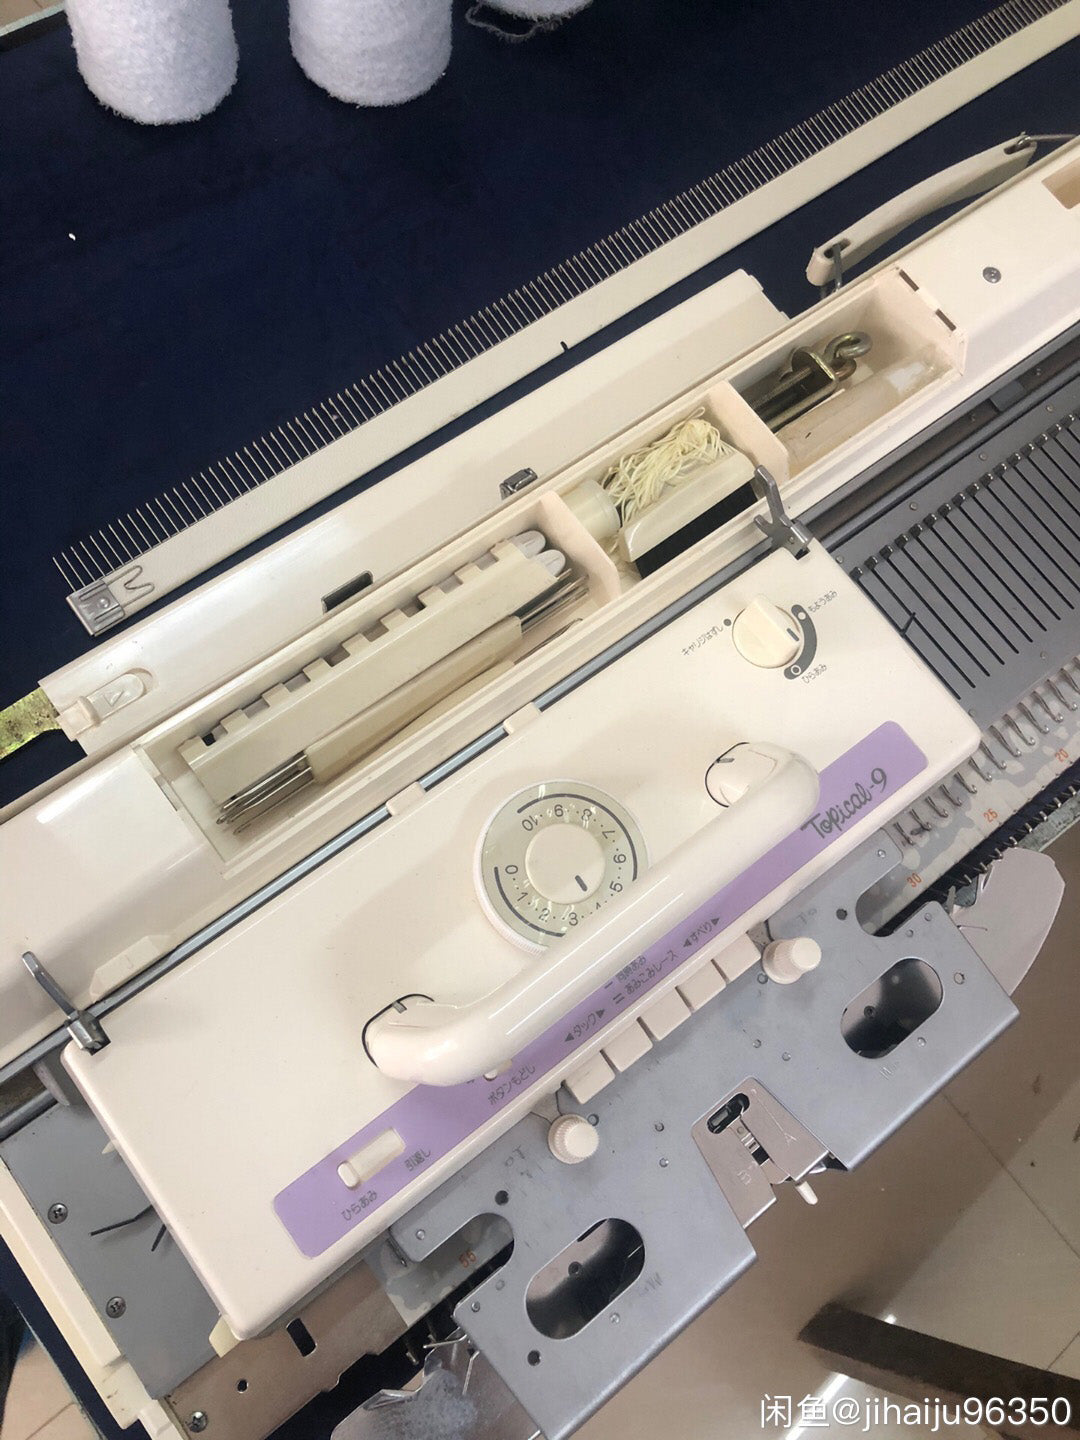 Brother KH270 Chunky Electronic Knitting Machine